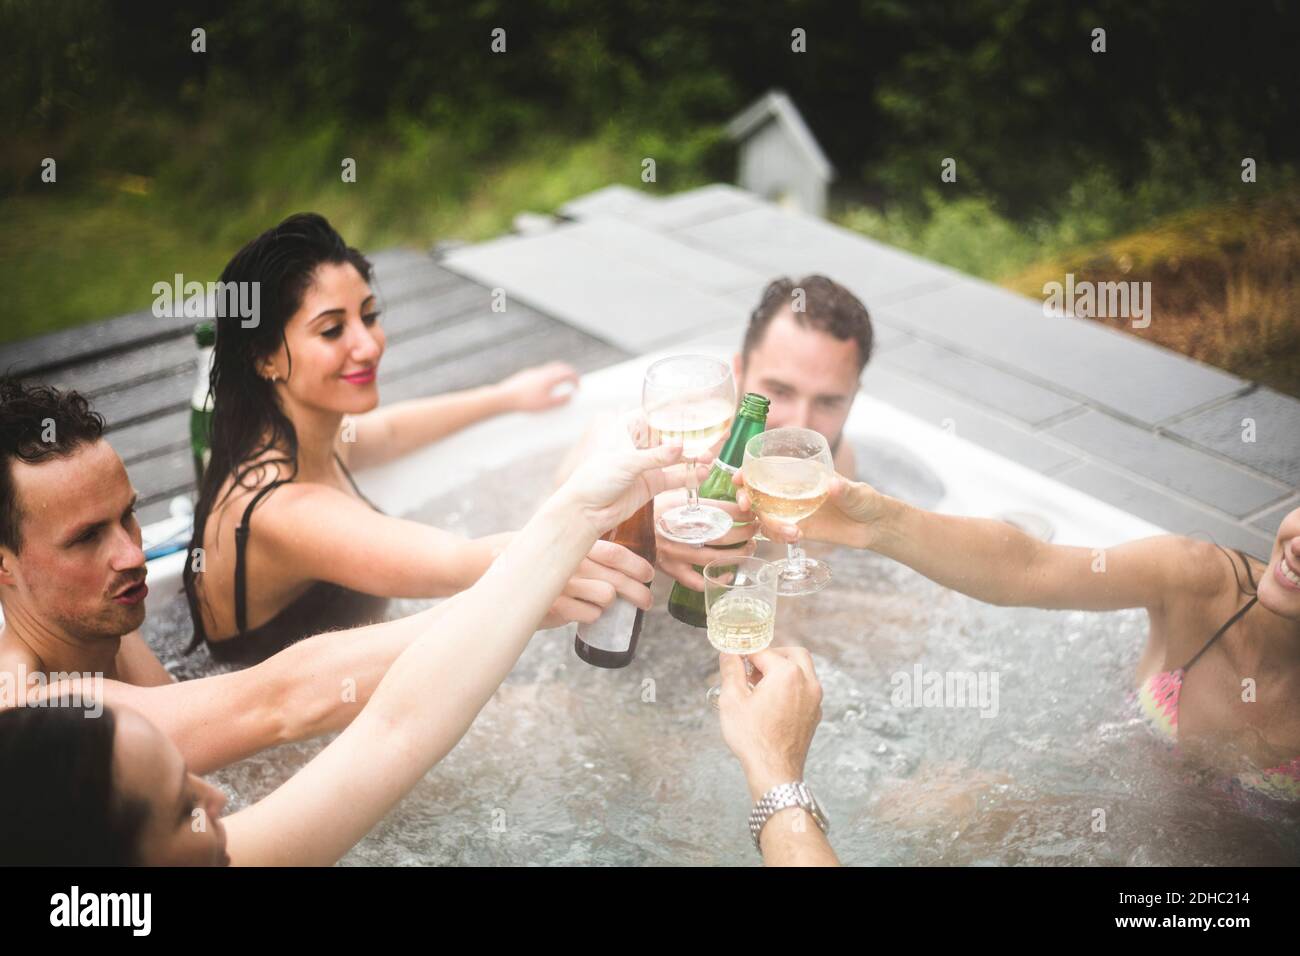 Carefree male and female friends toasting drinks in hot tub during weekend getaway Stock Photo